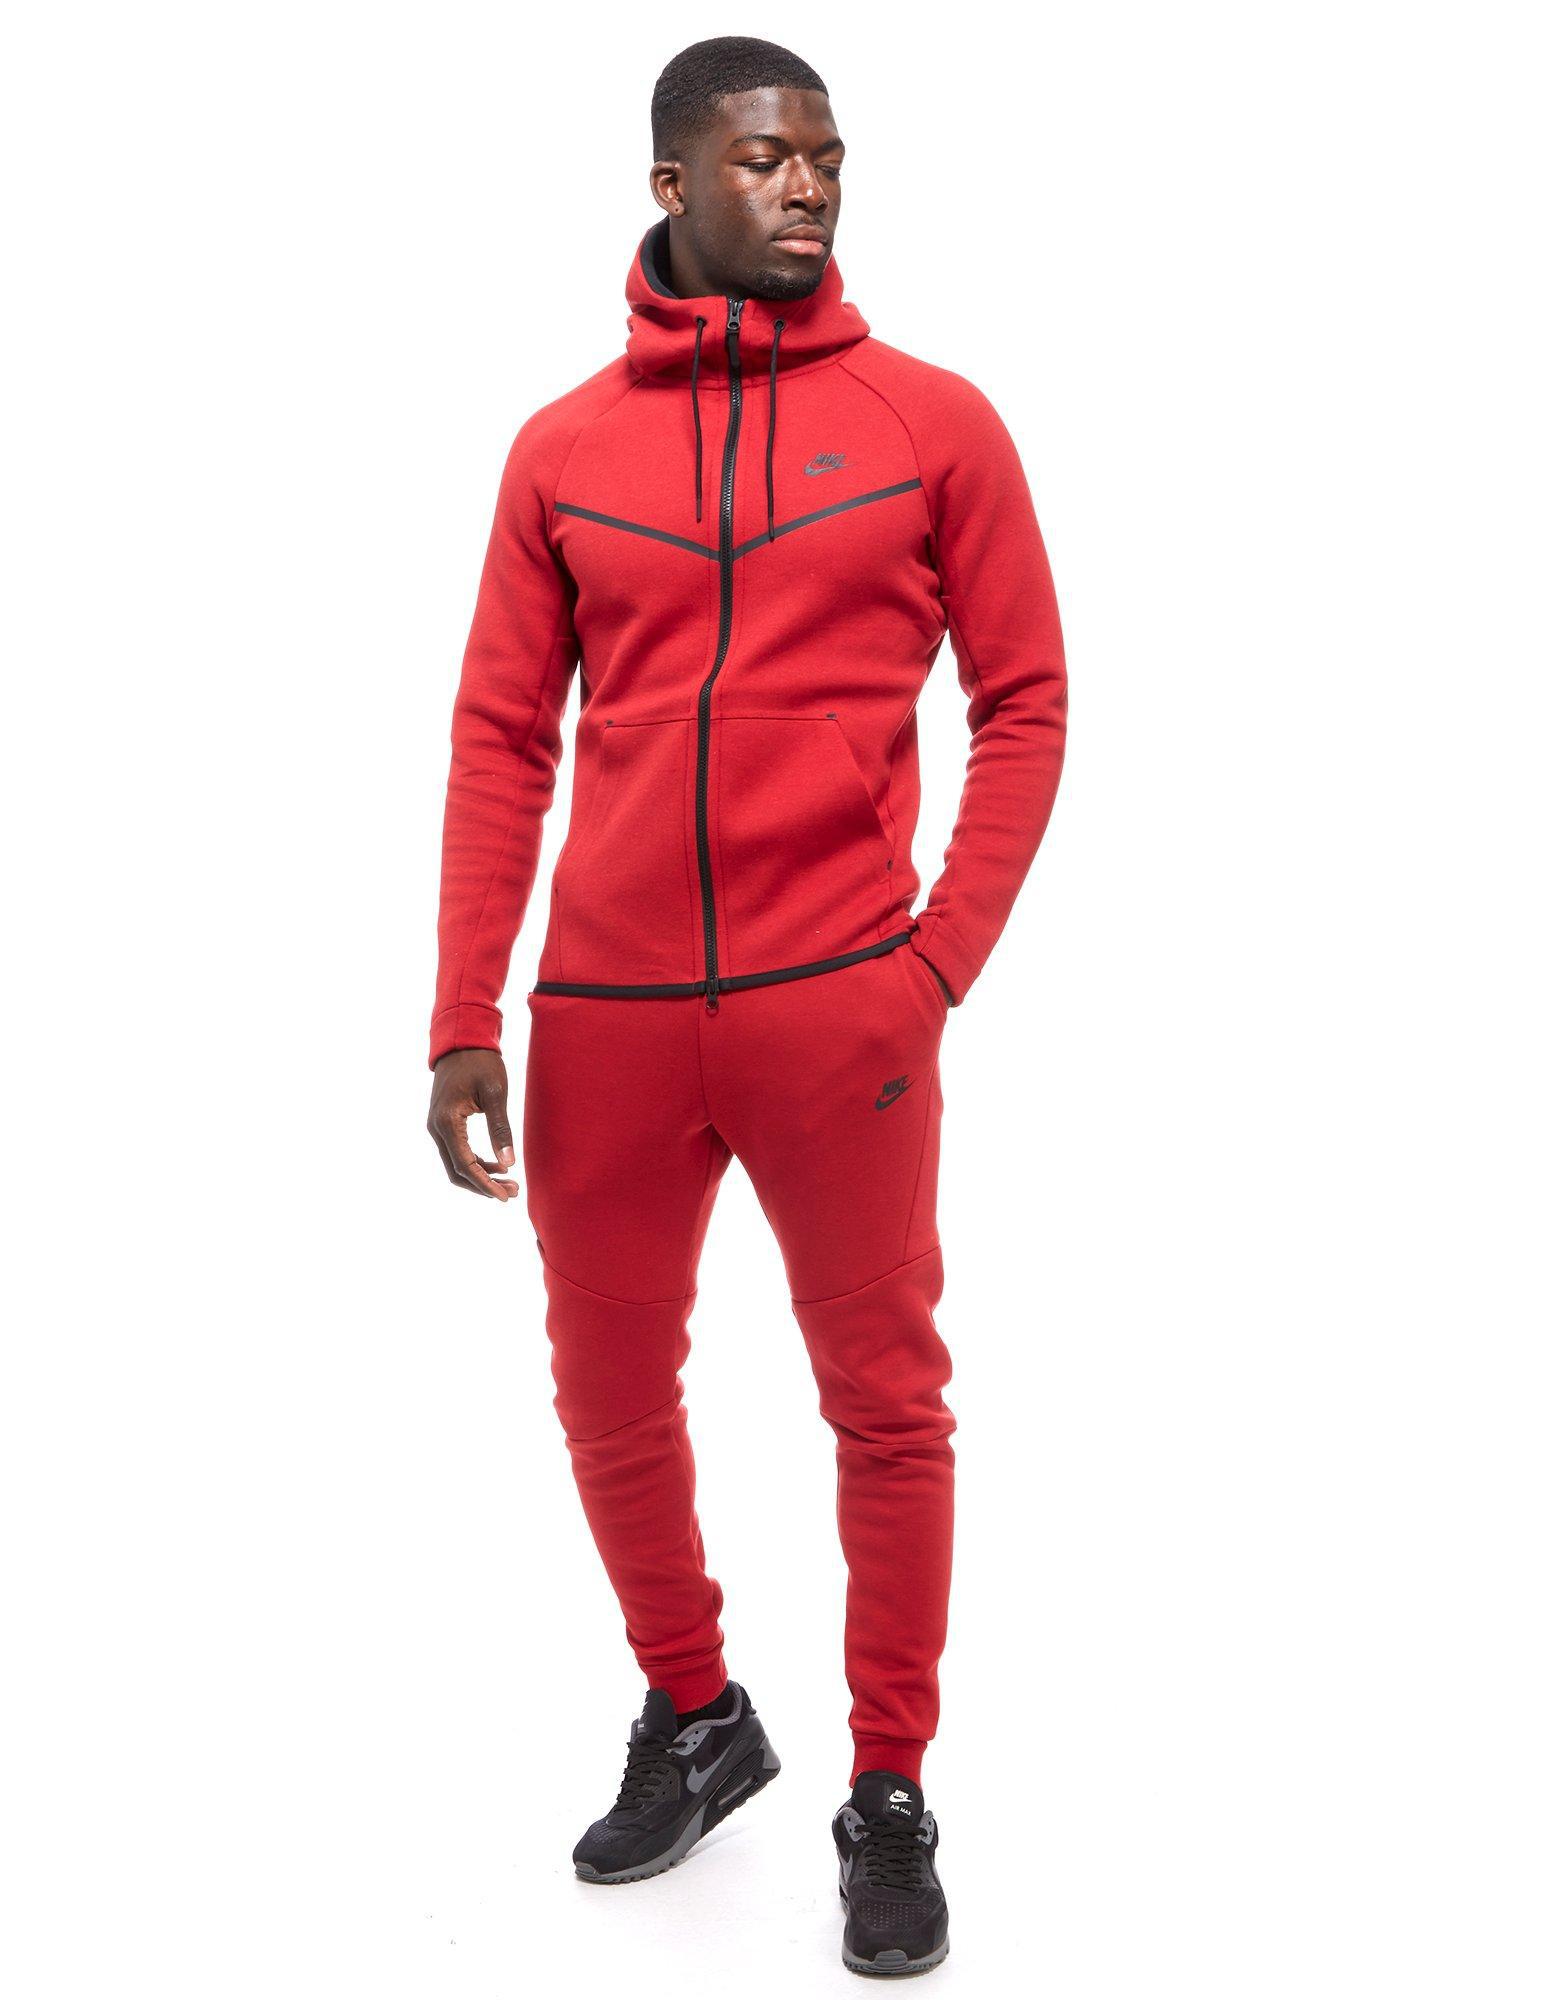 red and black nike tech sweatsuit